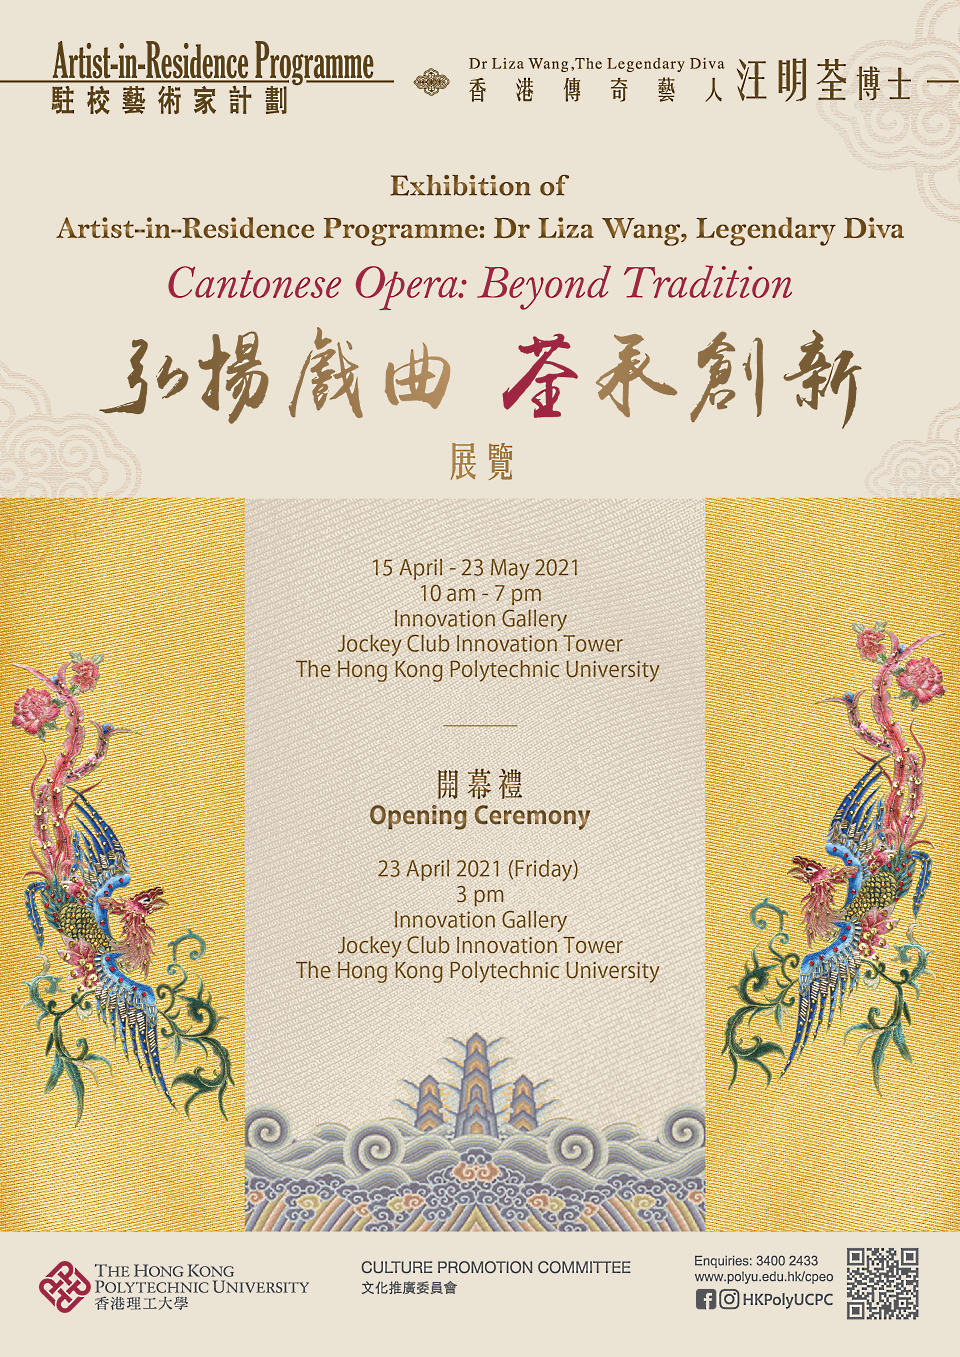 Exhibition of Artist-in-Residence Programme: Dr Liza Wang, Legendary Diva Cantonese Opera: Beyond Tradition